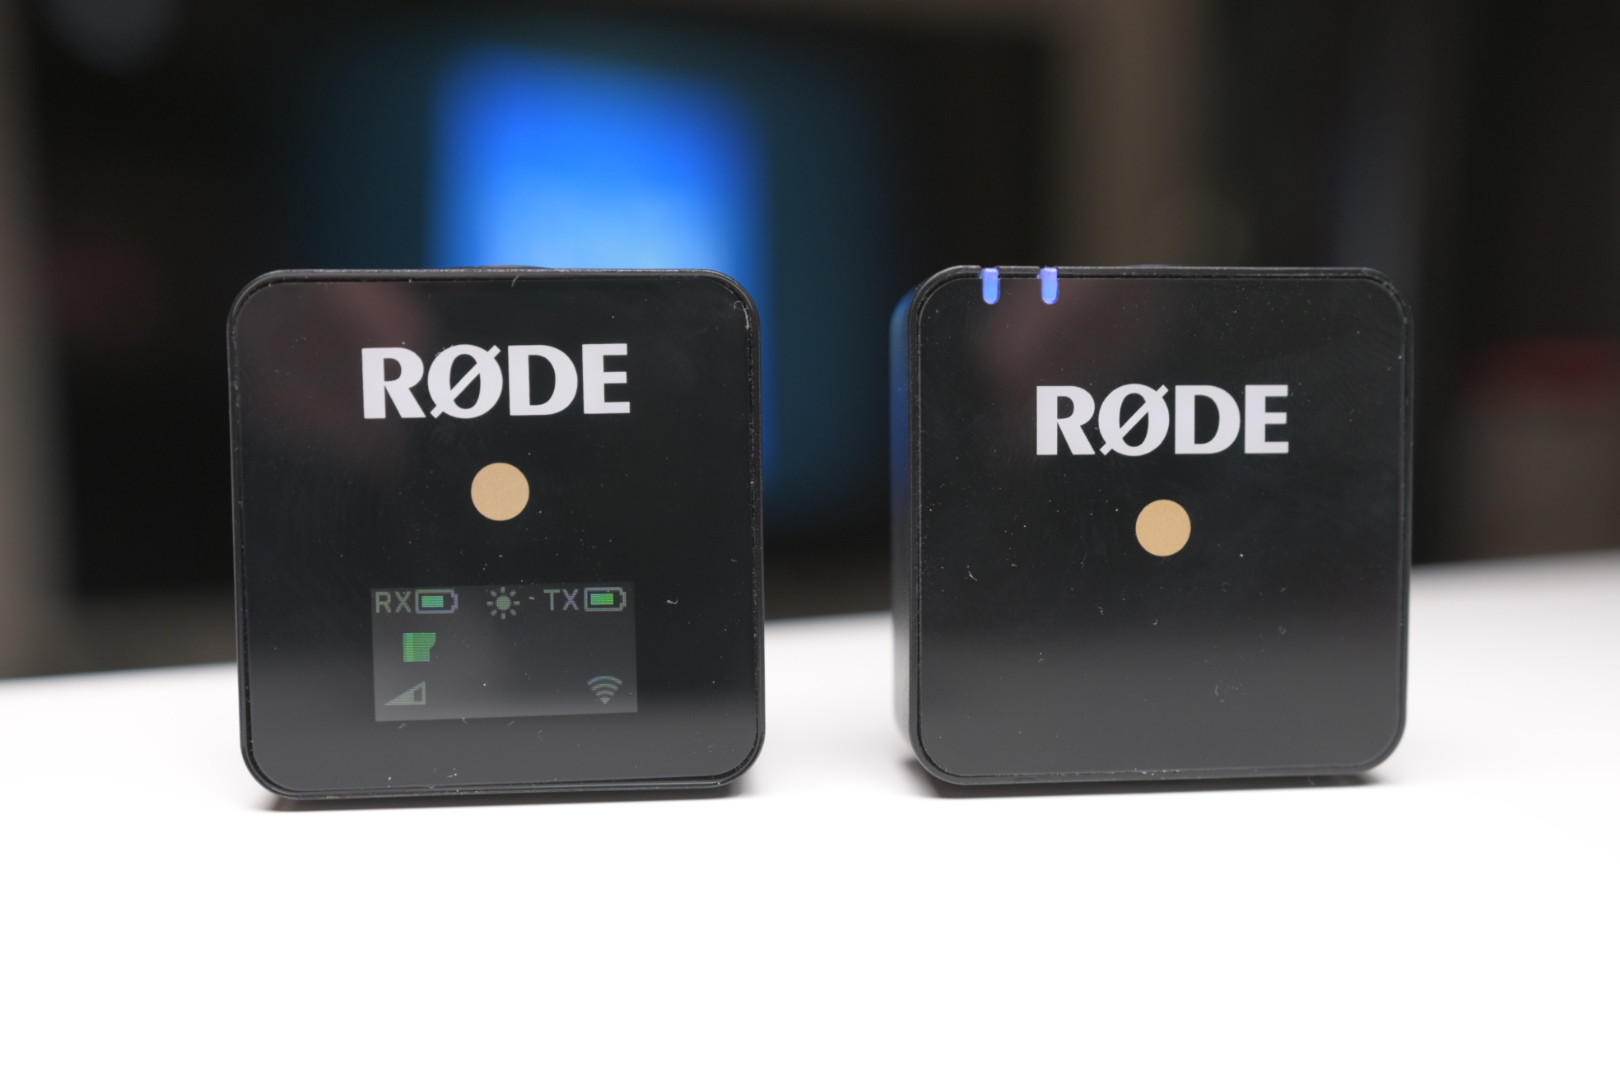 RØDE Wireless GO Review - Newsshooter